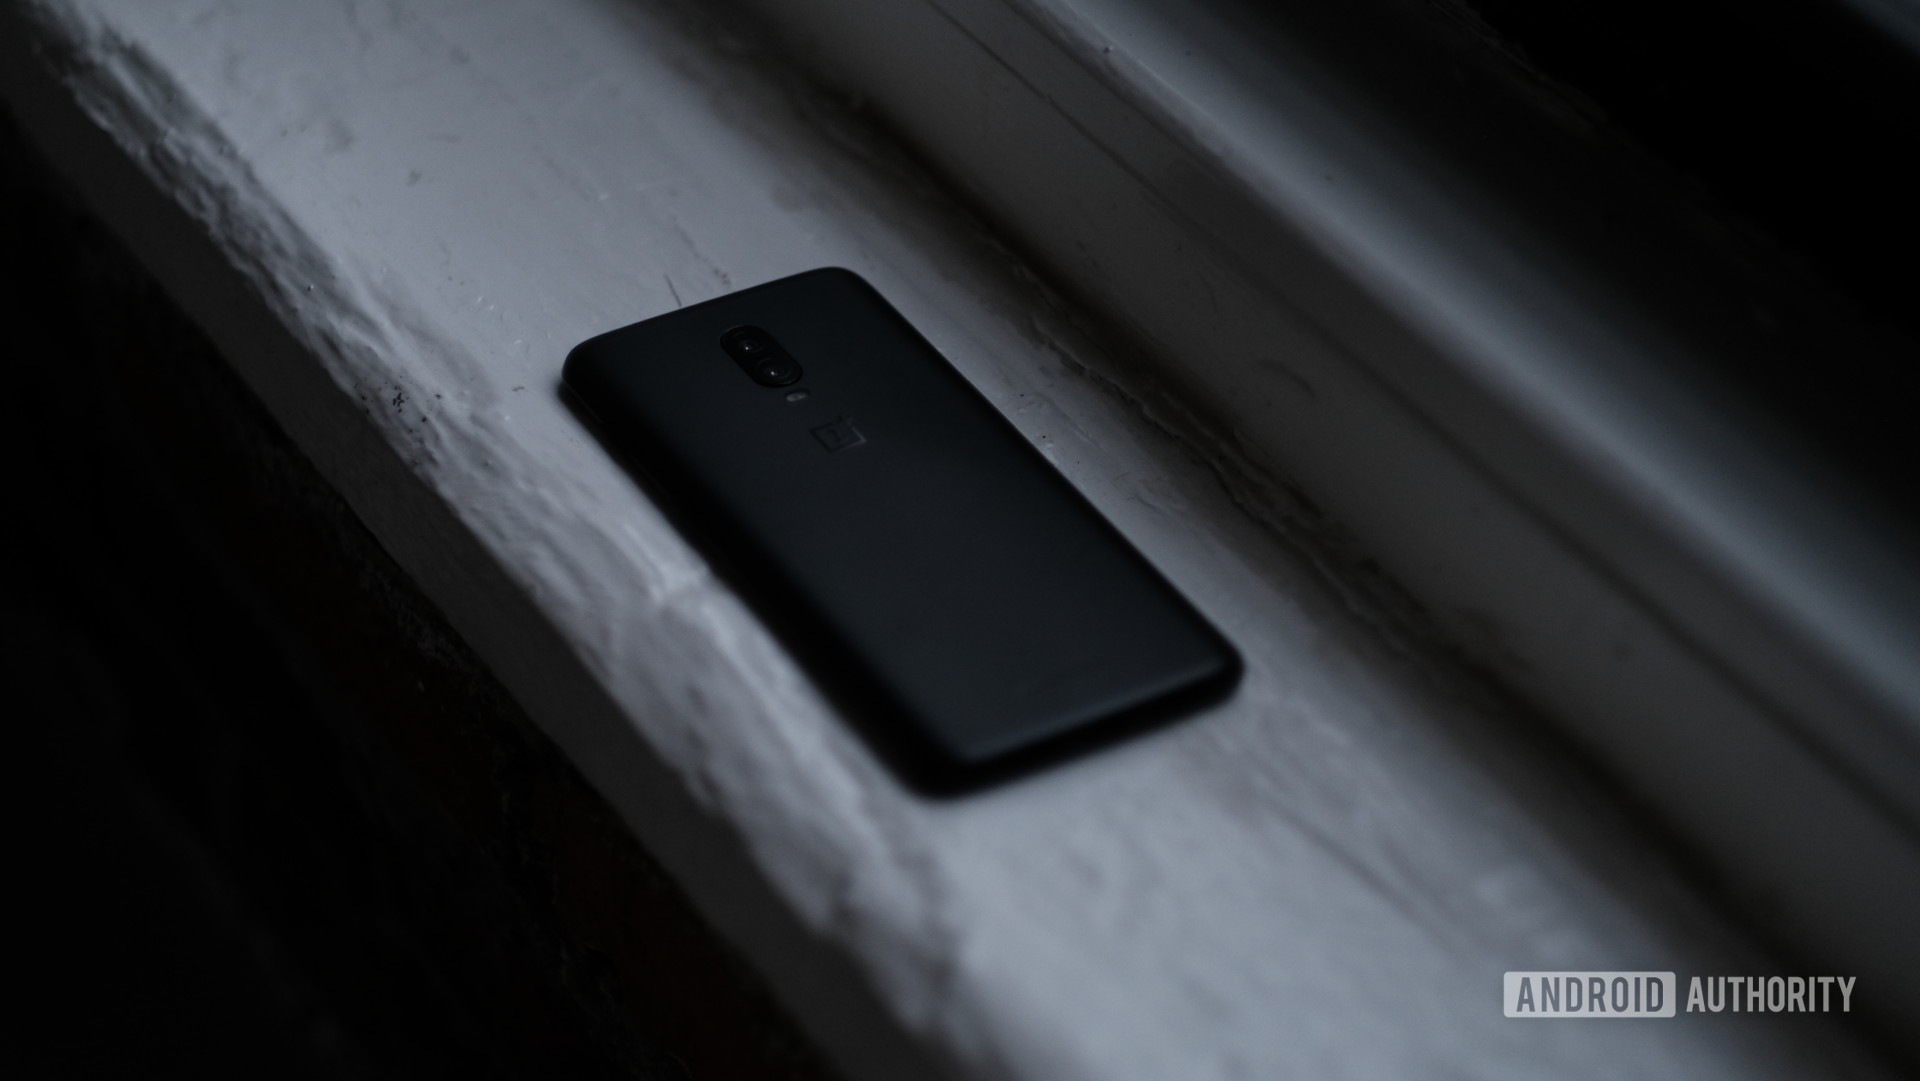 Download OnePlus 6T wallpapers: Get them all here!